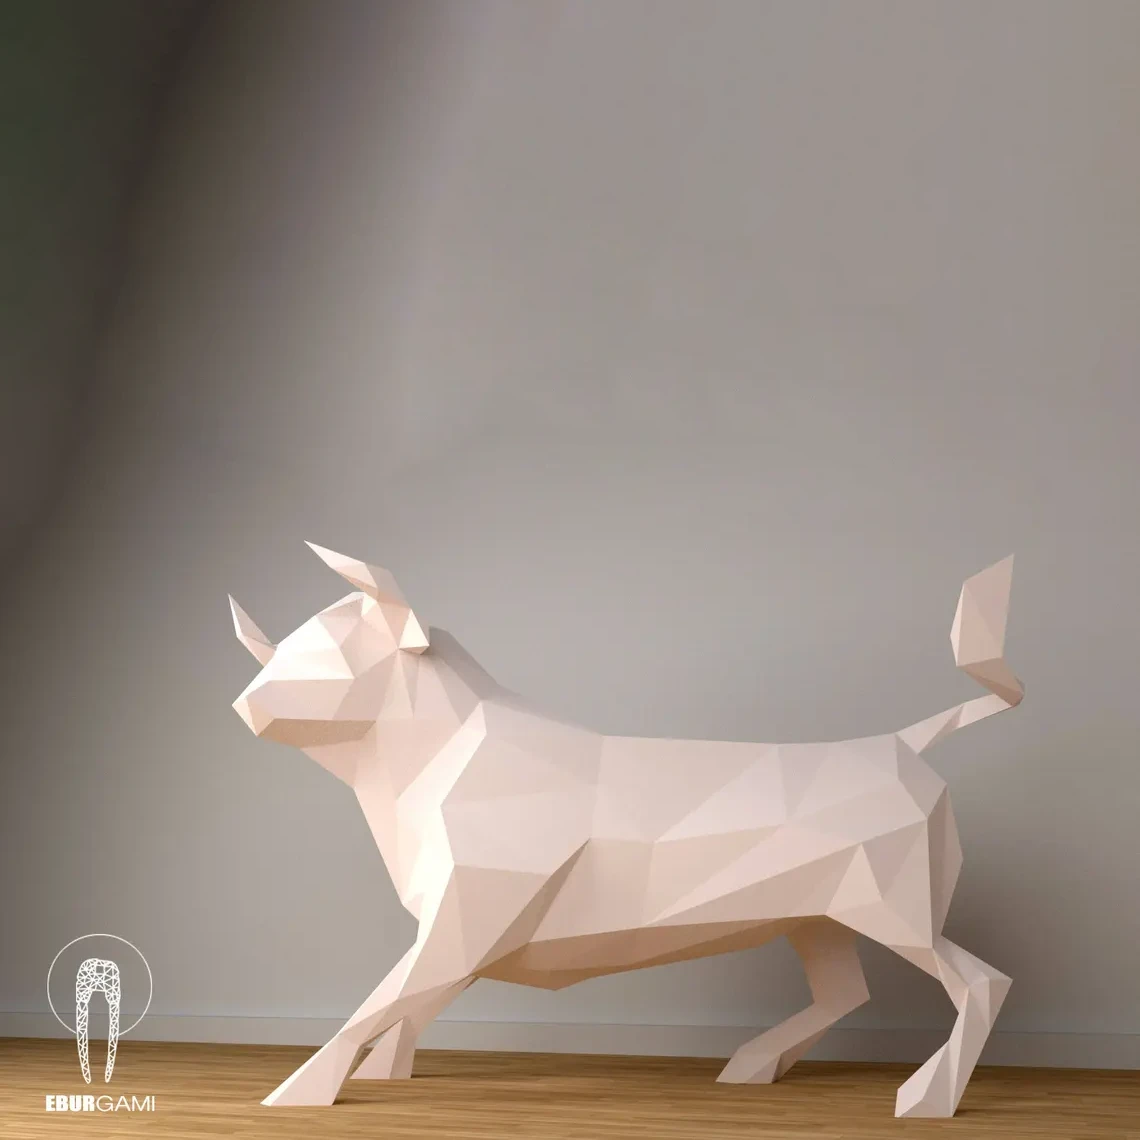 Bull XXL Papercraft, 3D Papercraft - Build Your Own Low Poly Paper Sculpture from PDF Download (DIY gift, Wall Decor for home and office)